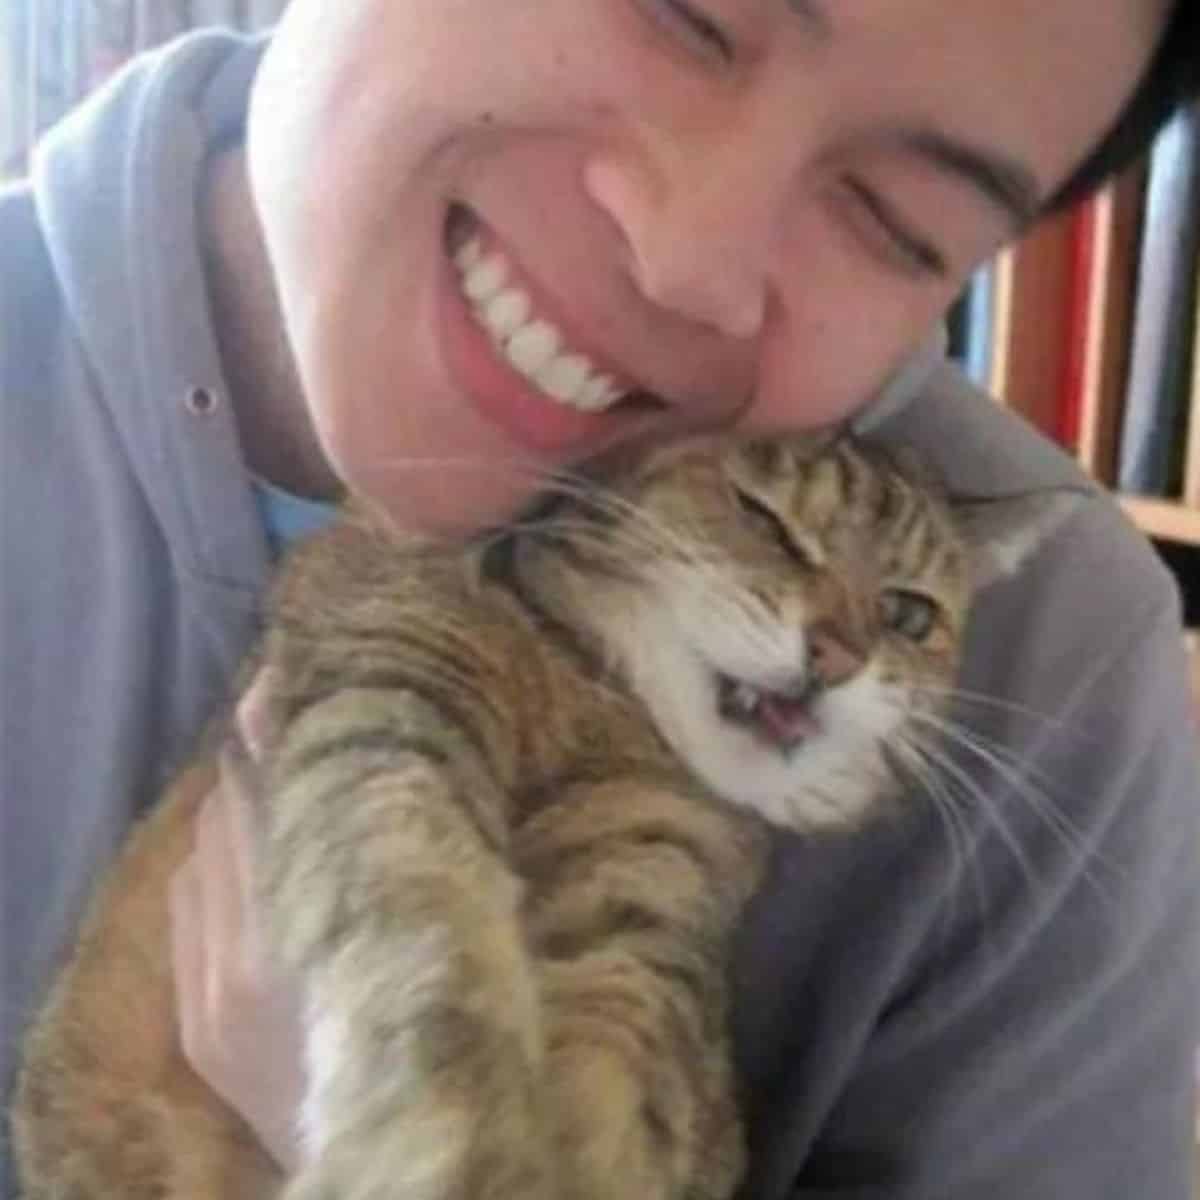 the cat makes faces in the woman's arms